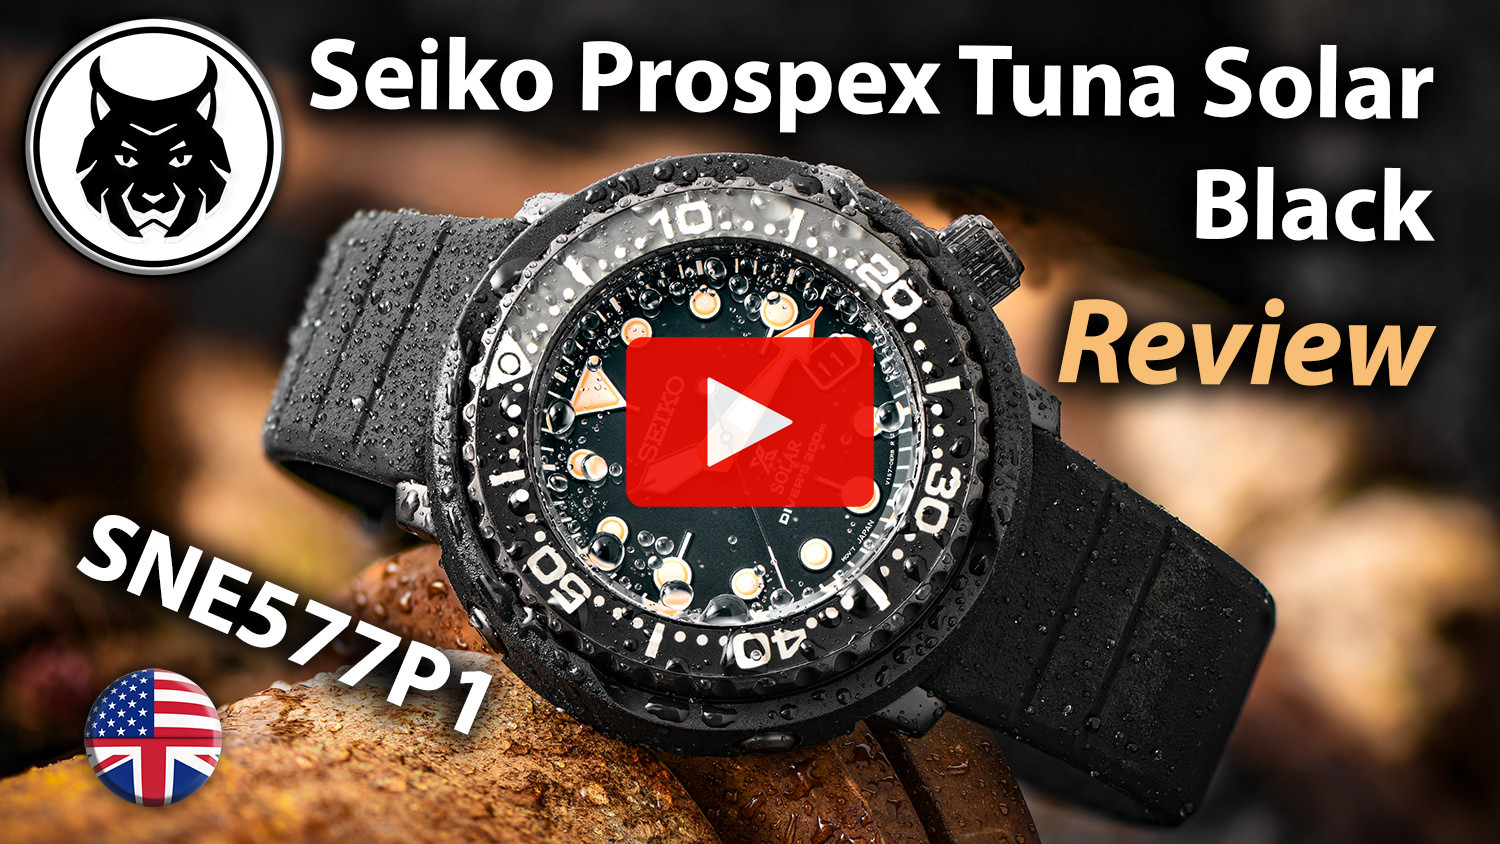 Short YouTube Video Review with hands on, wrist roll, details, ... - Seiko Prospex Tuna Solar Black SNE577P1